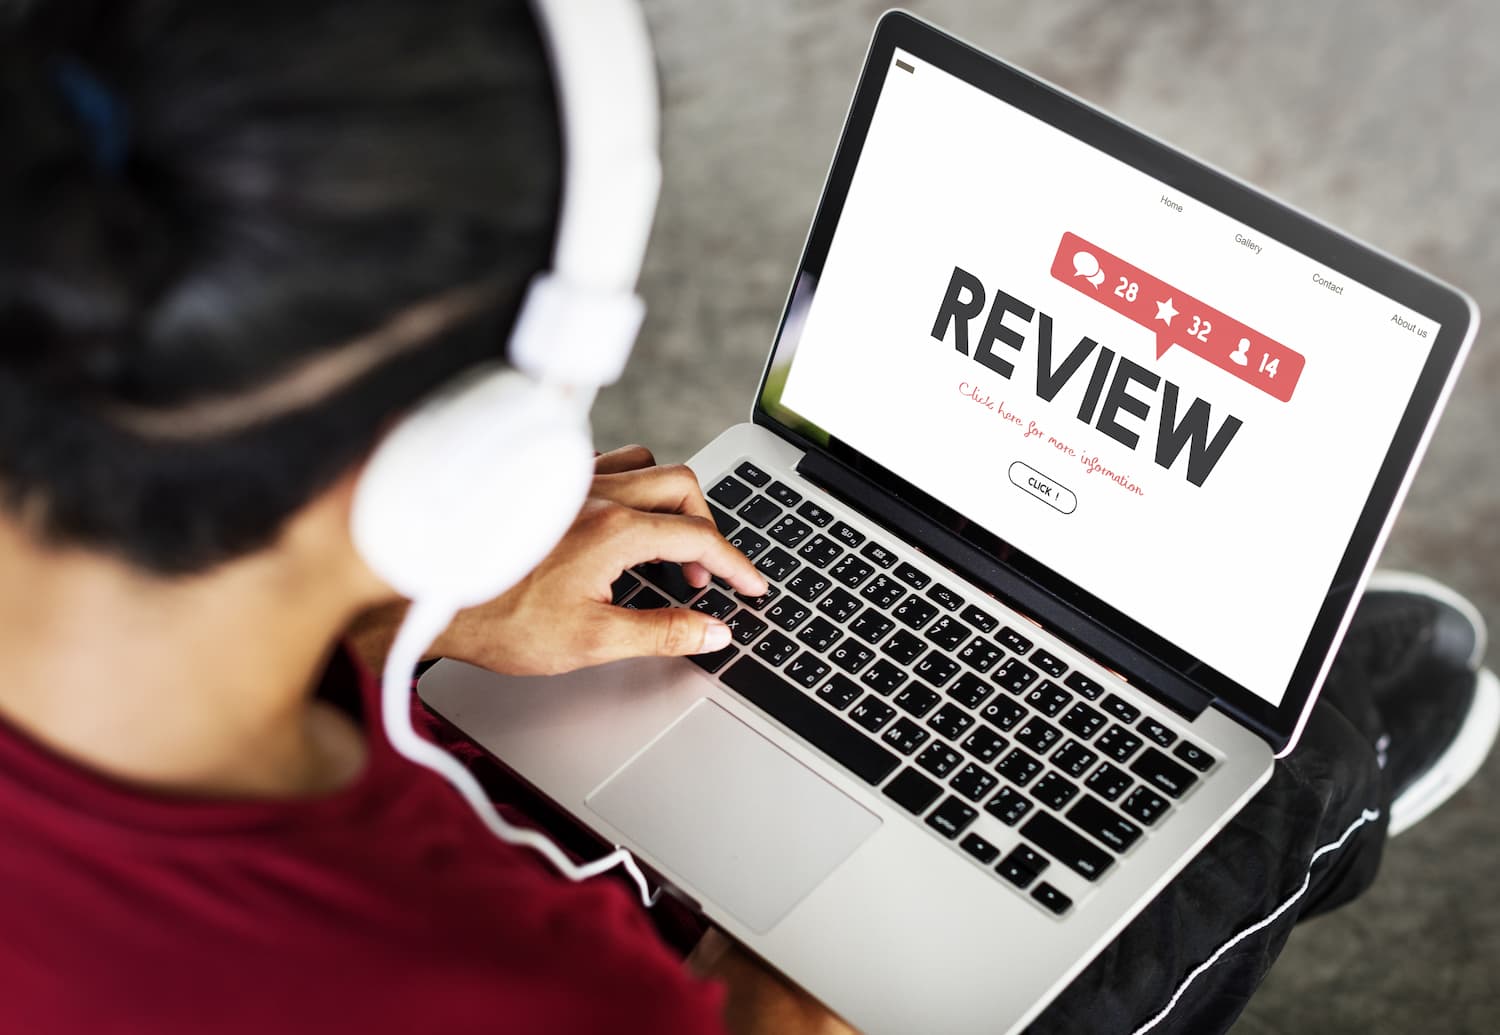  How Google Reviews can Change Your Business